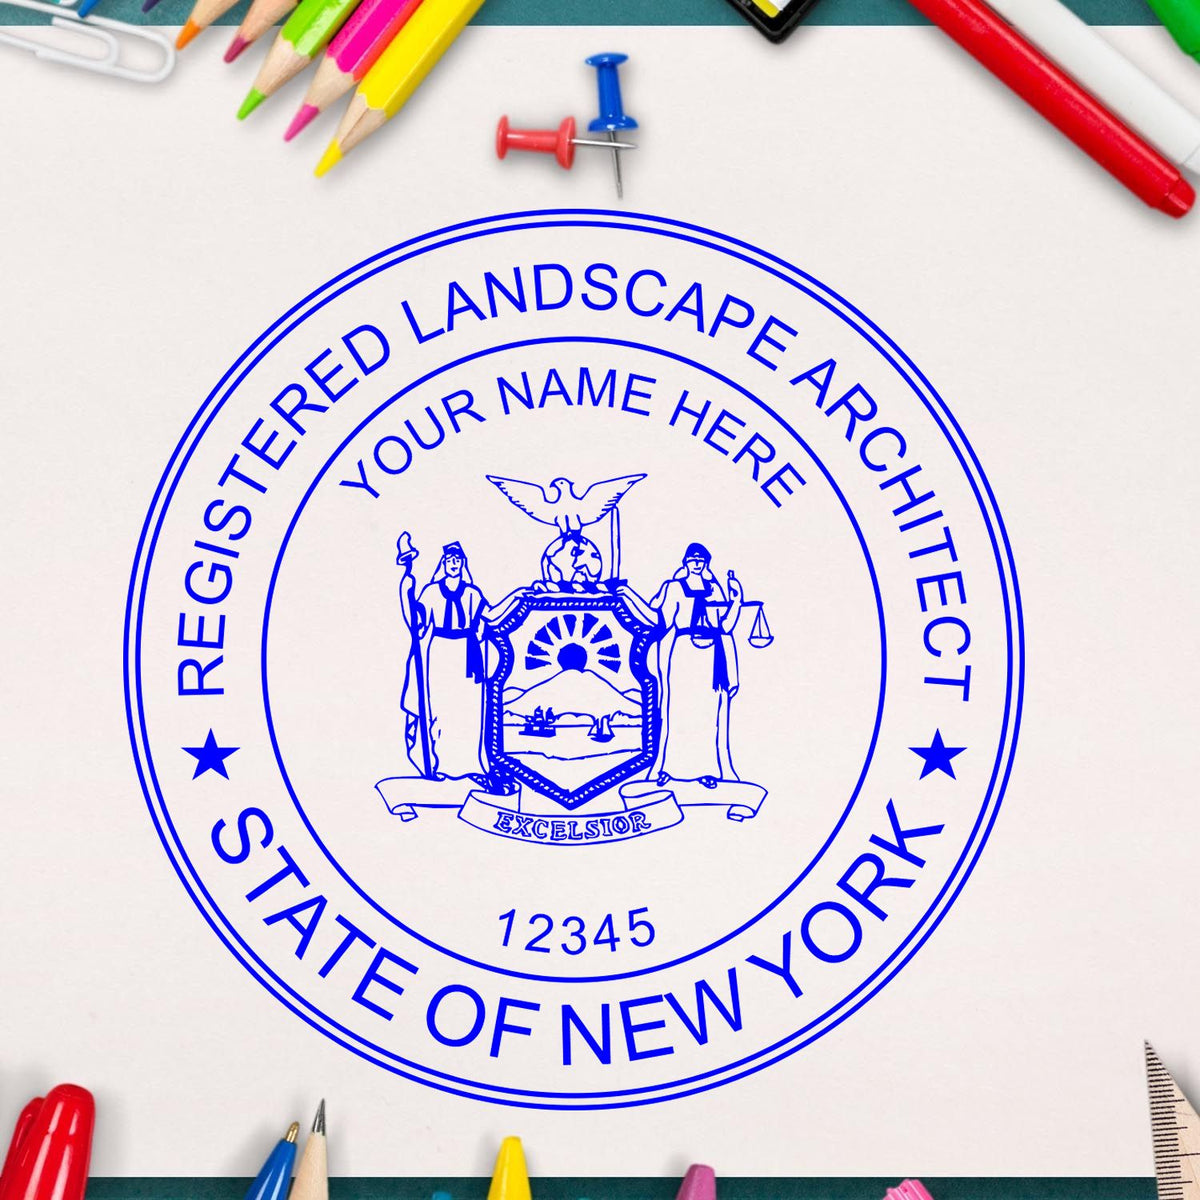 Another Example of a stamped impression of the Slim Pre-Inked New York Landscape Architect Seal Stamp on a piece of office paper.